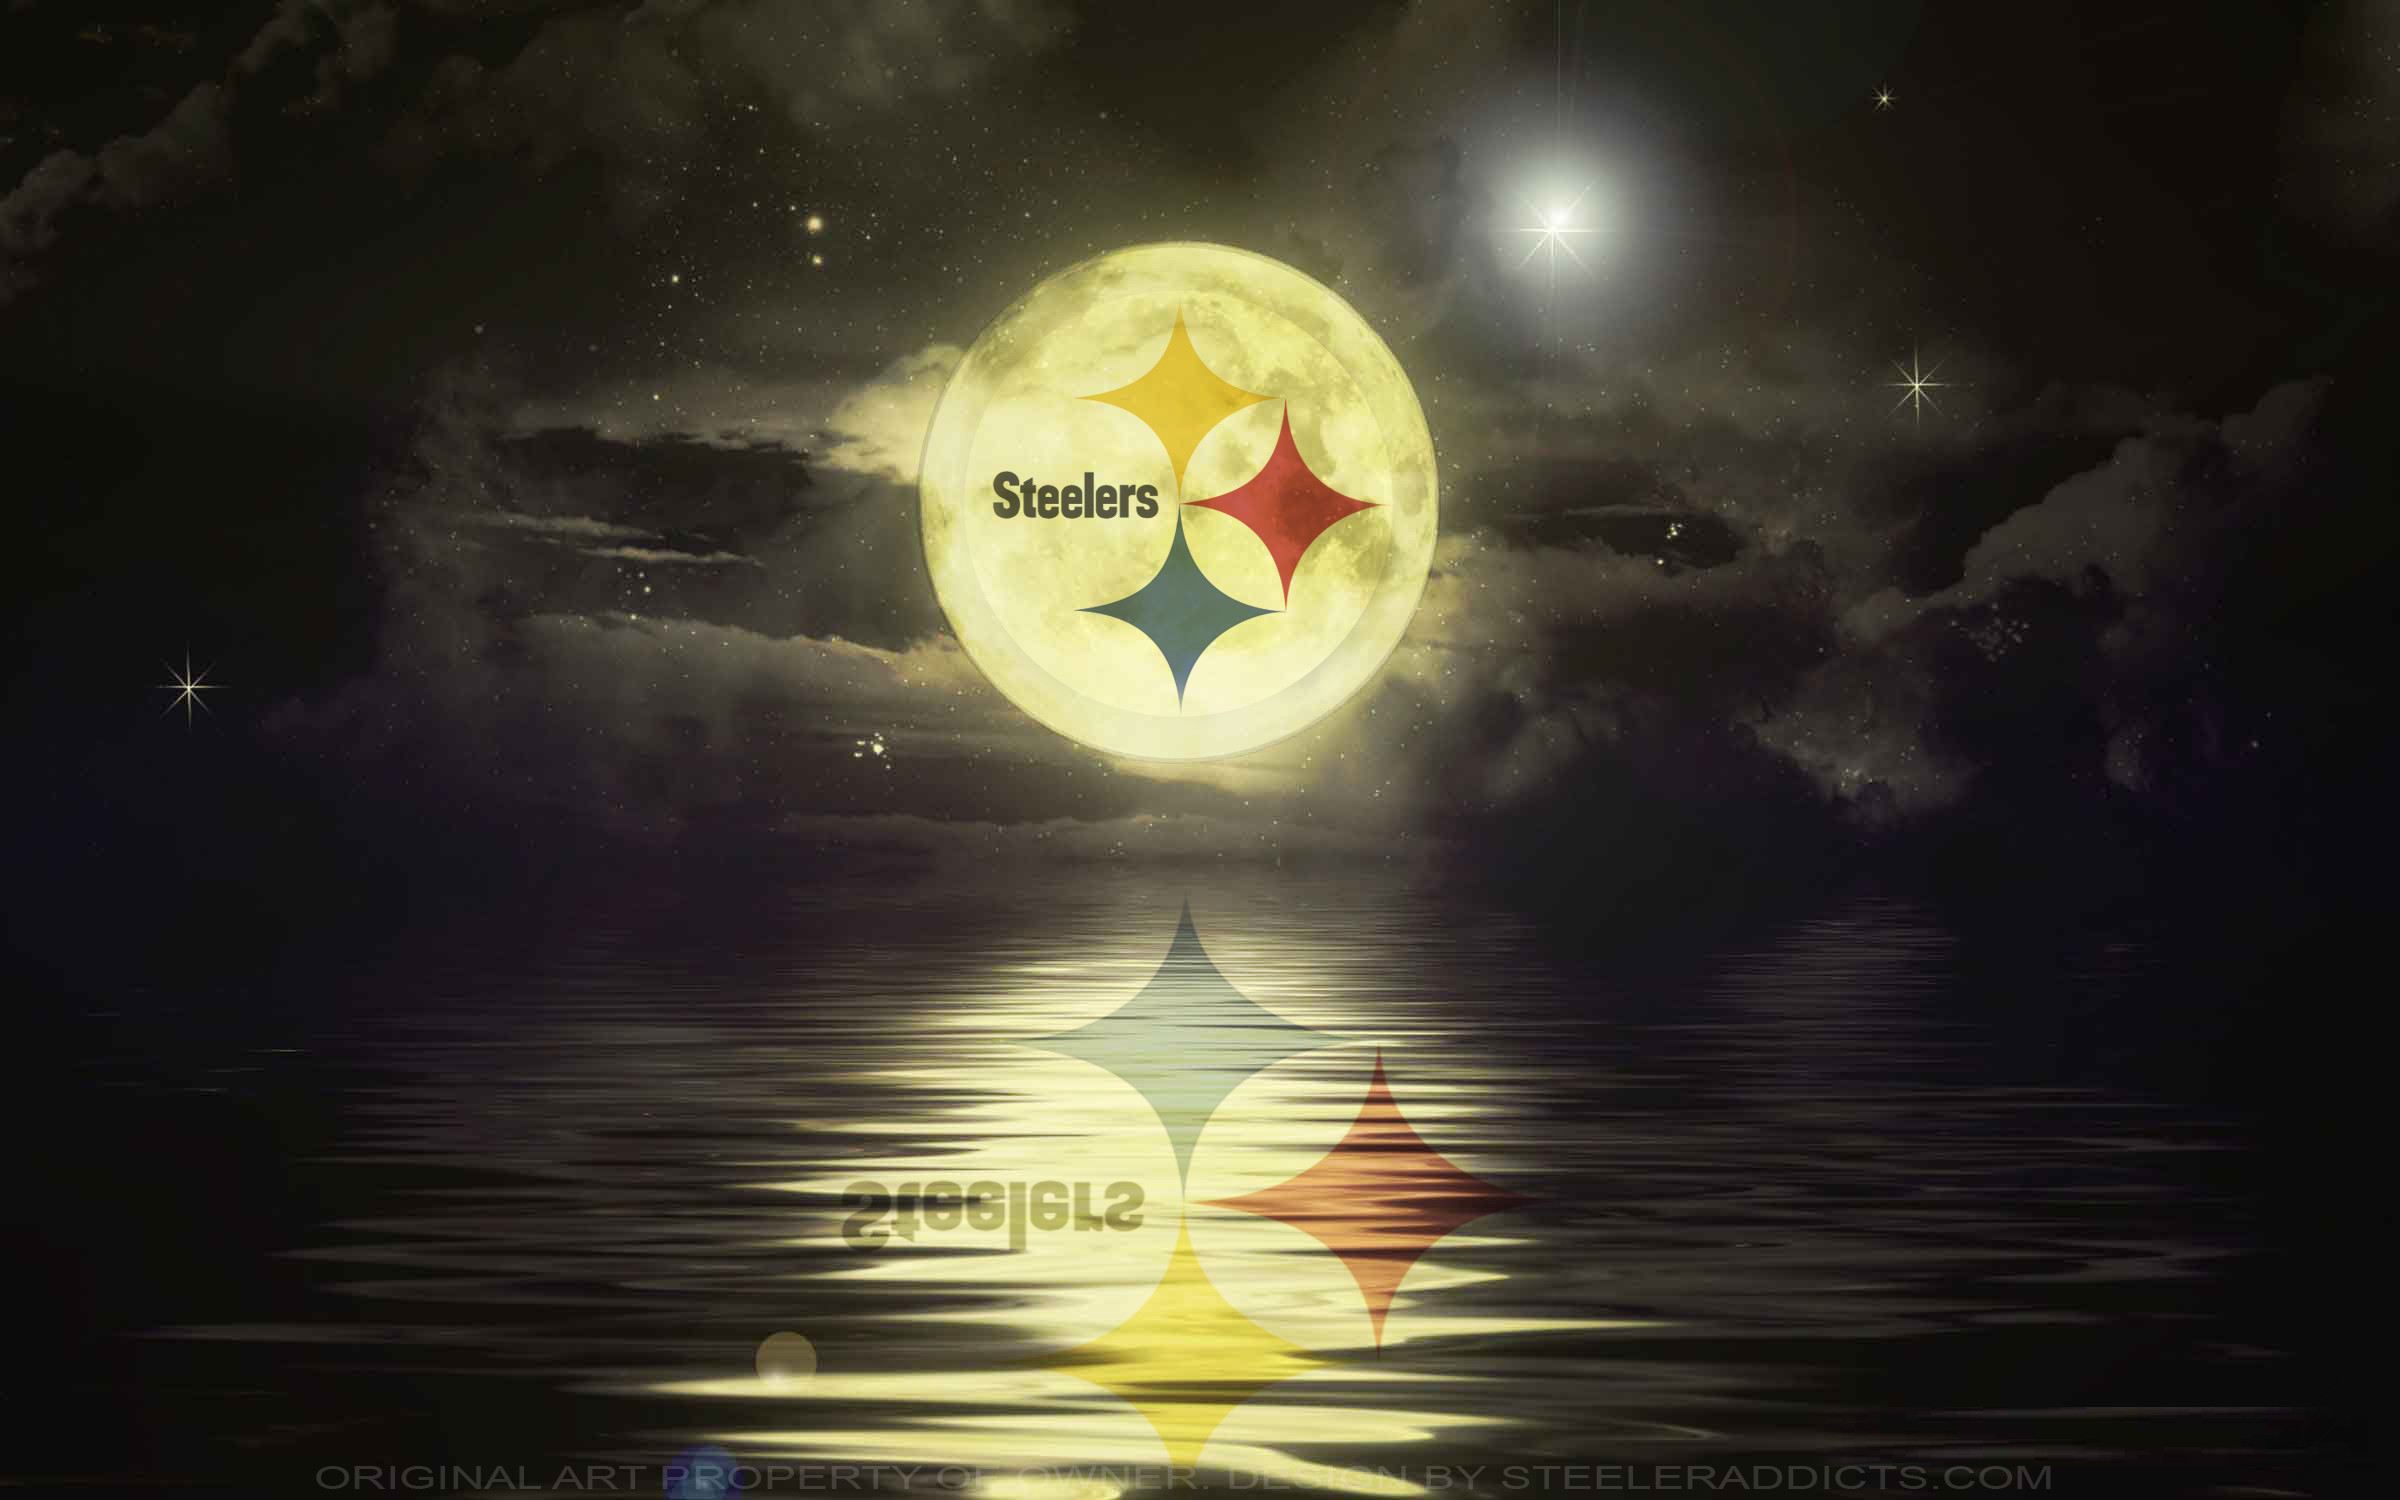 2400x1500 1000+ images about STEELERS on Pinterest | Wallpaper downloads